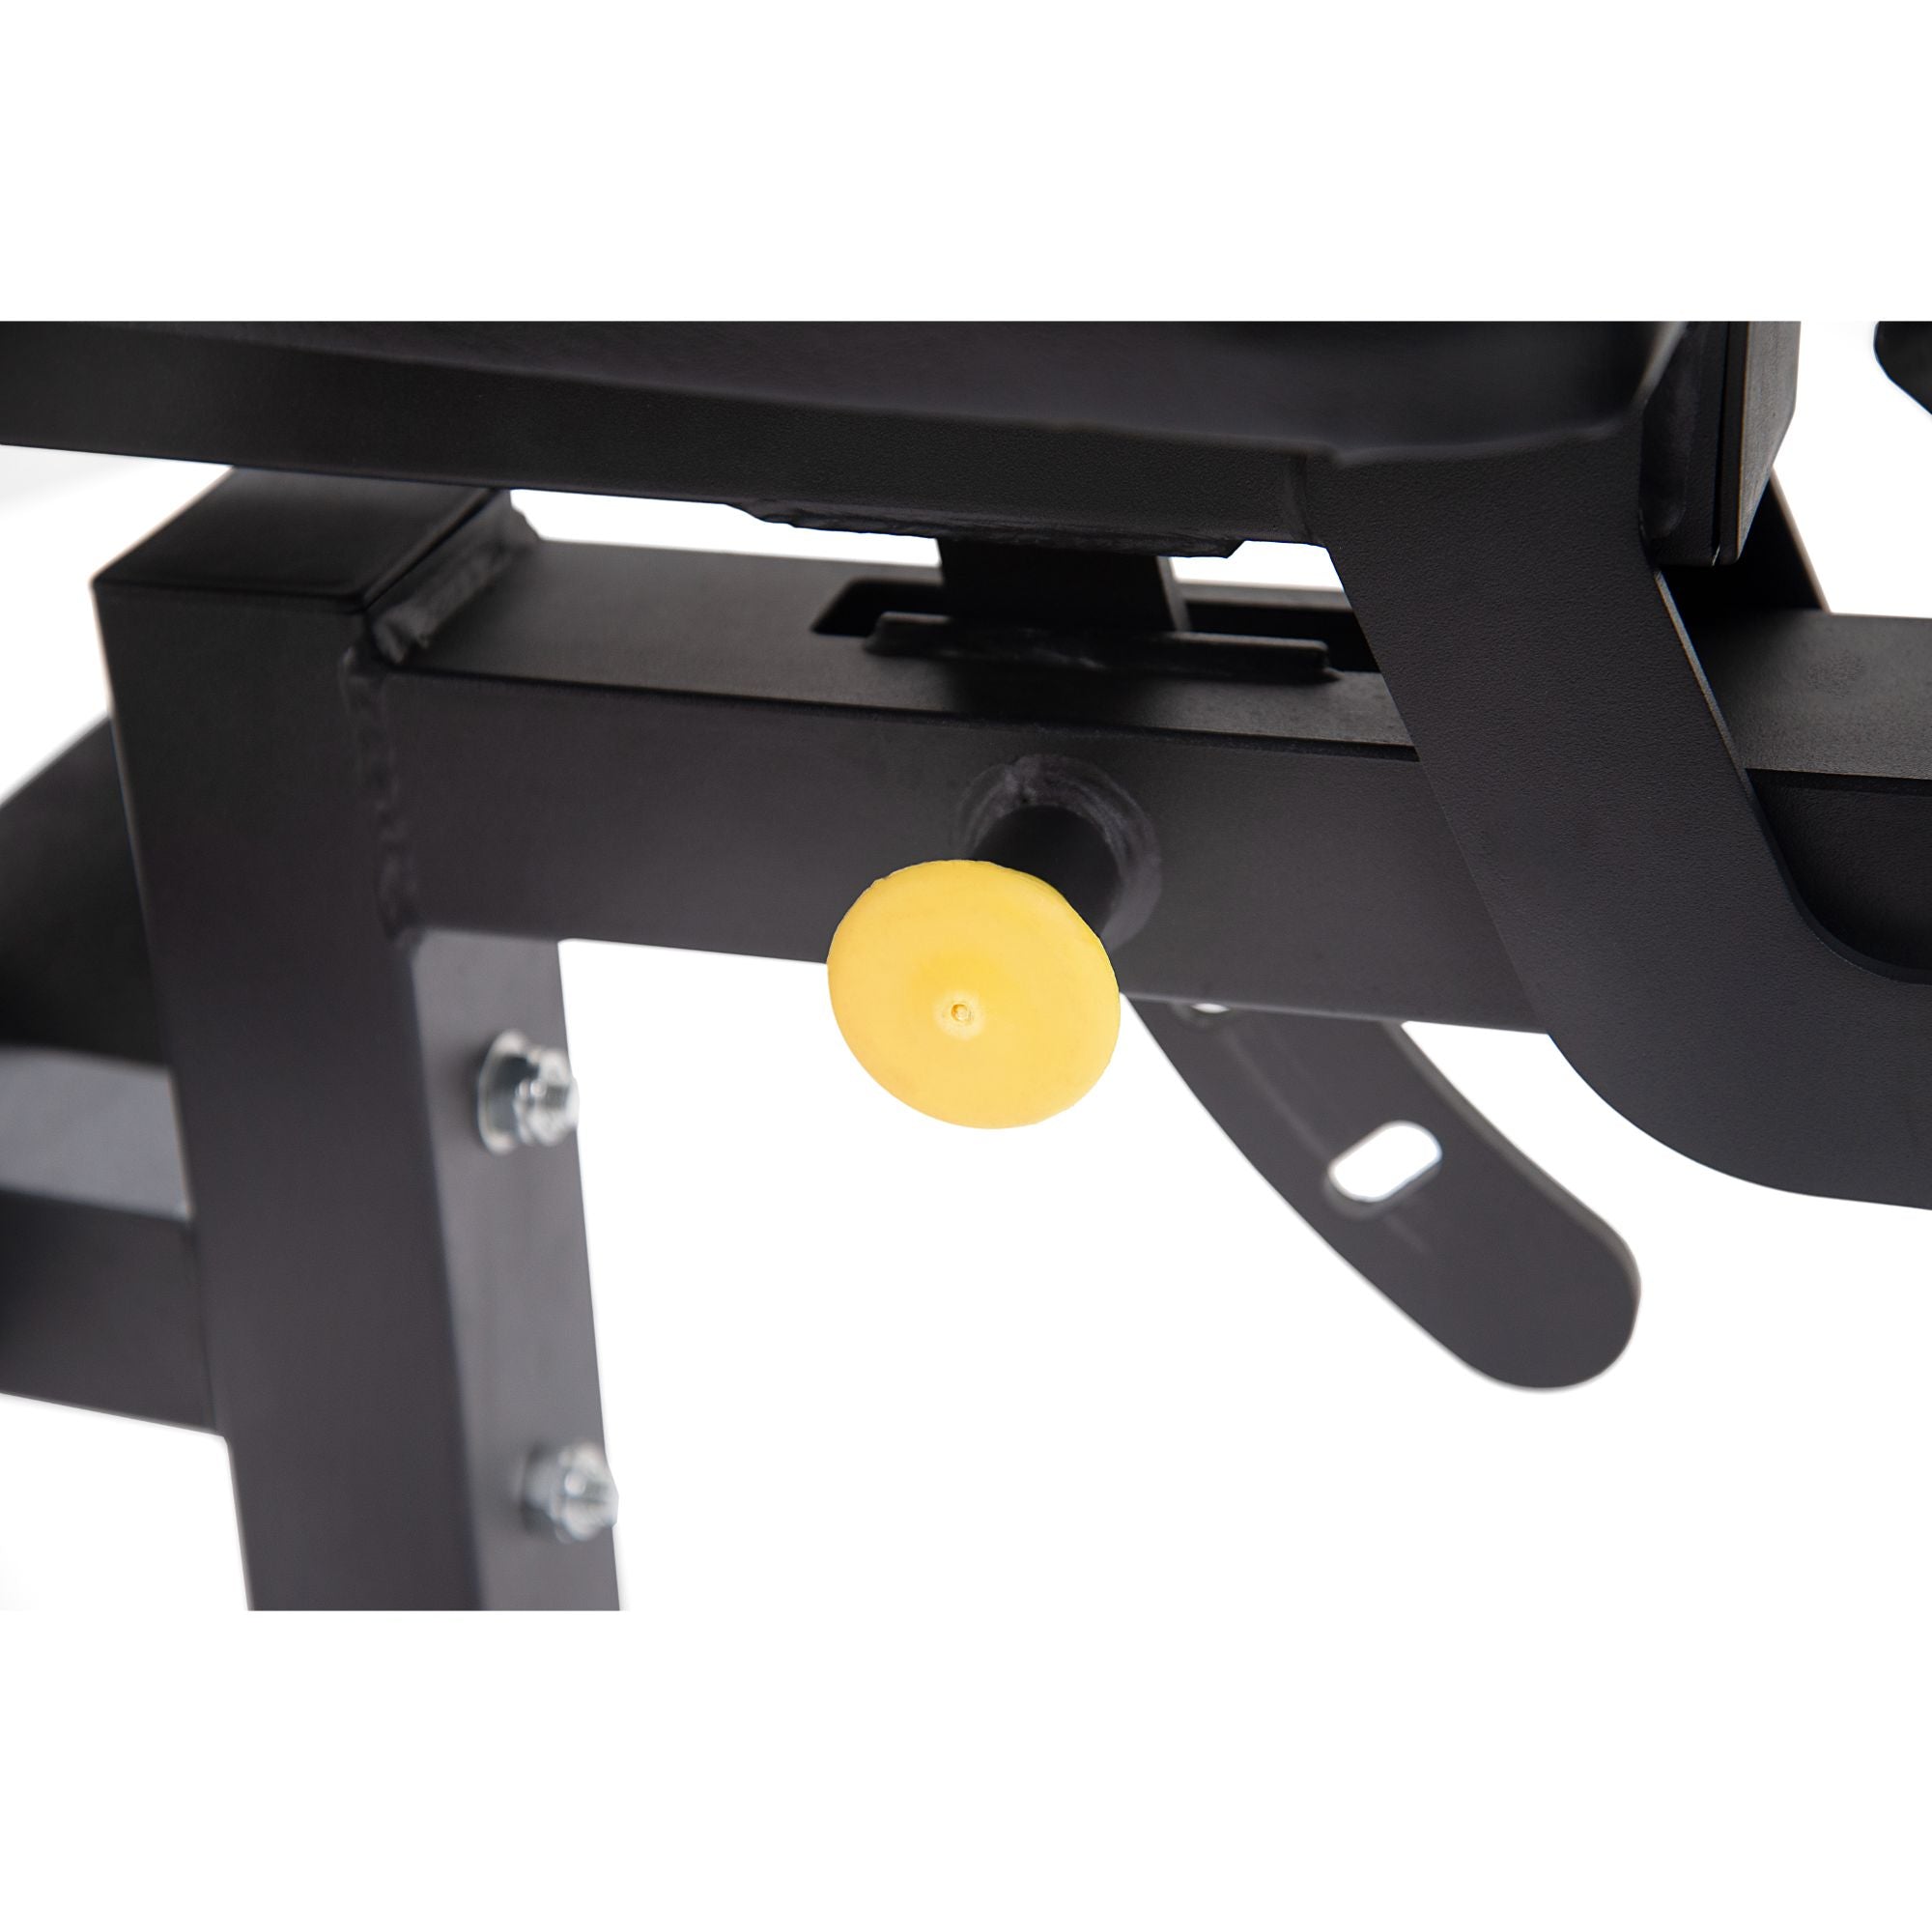 Adjustable Weight bench 300kg - Cannons UK